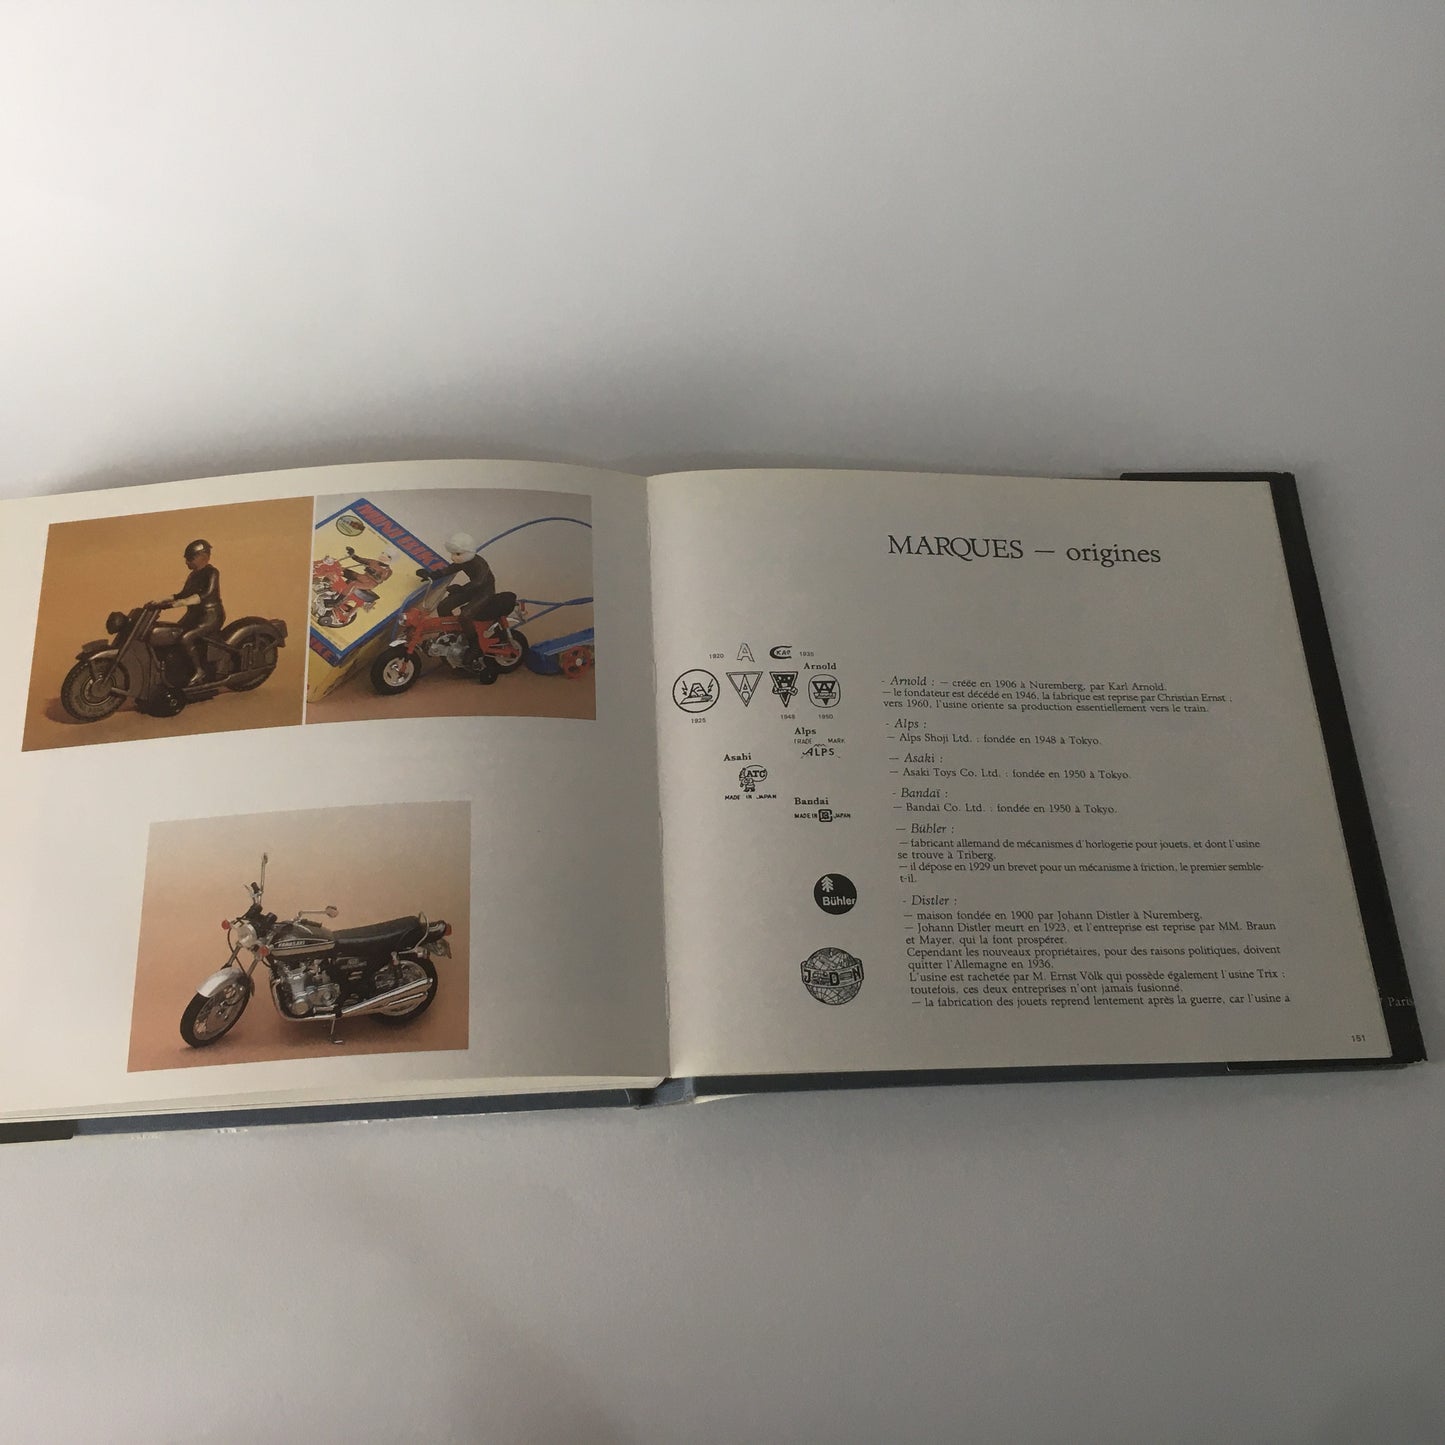 Book Motos-Jouets by F. Marchand for motorcycle models produced from 1895 to 1910